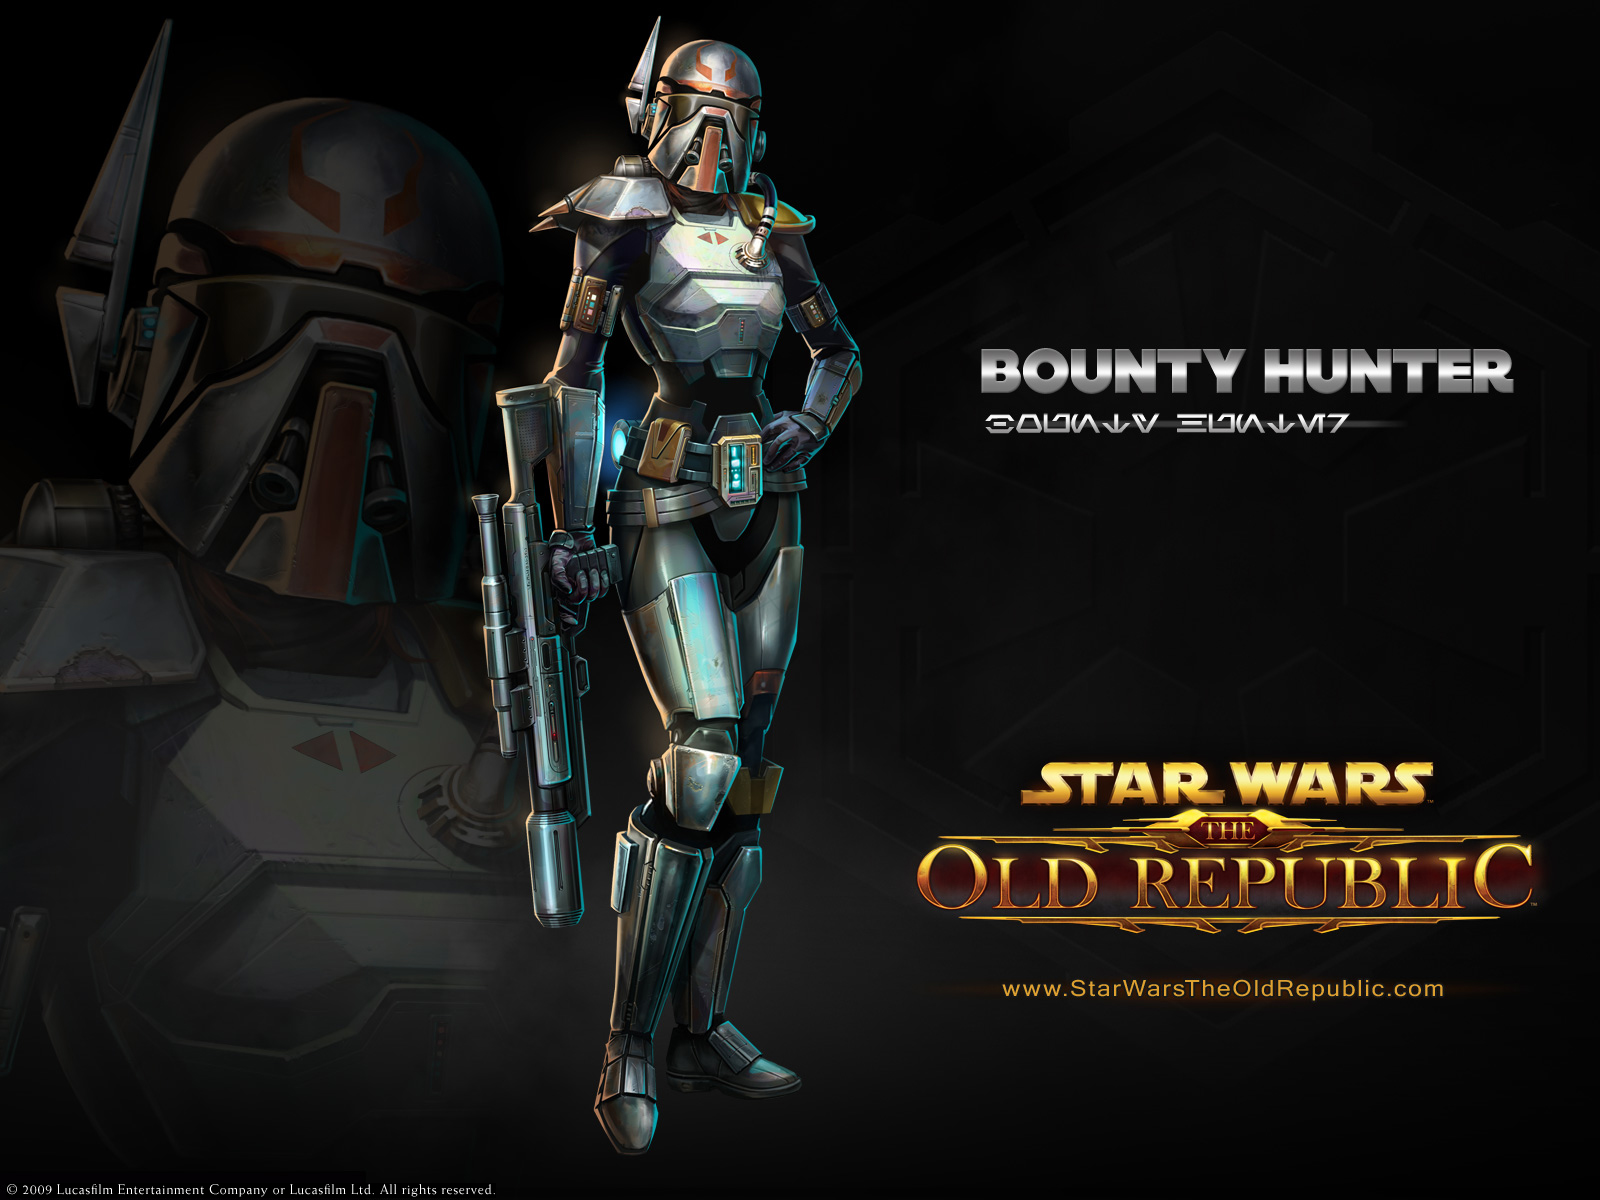 SWTOR Wallpapers Star Wars Wallpapers Star Wars TOR Fever SWTOR